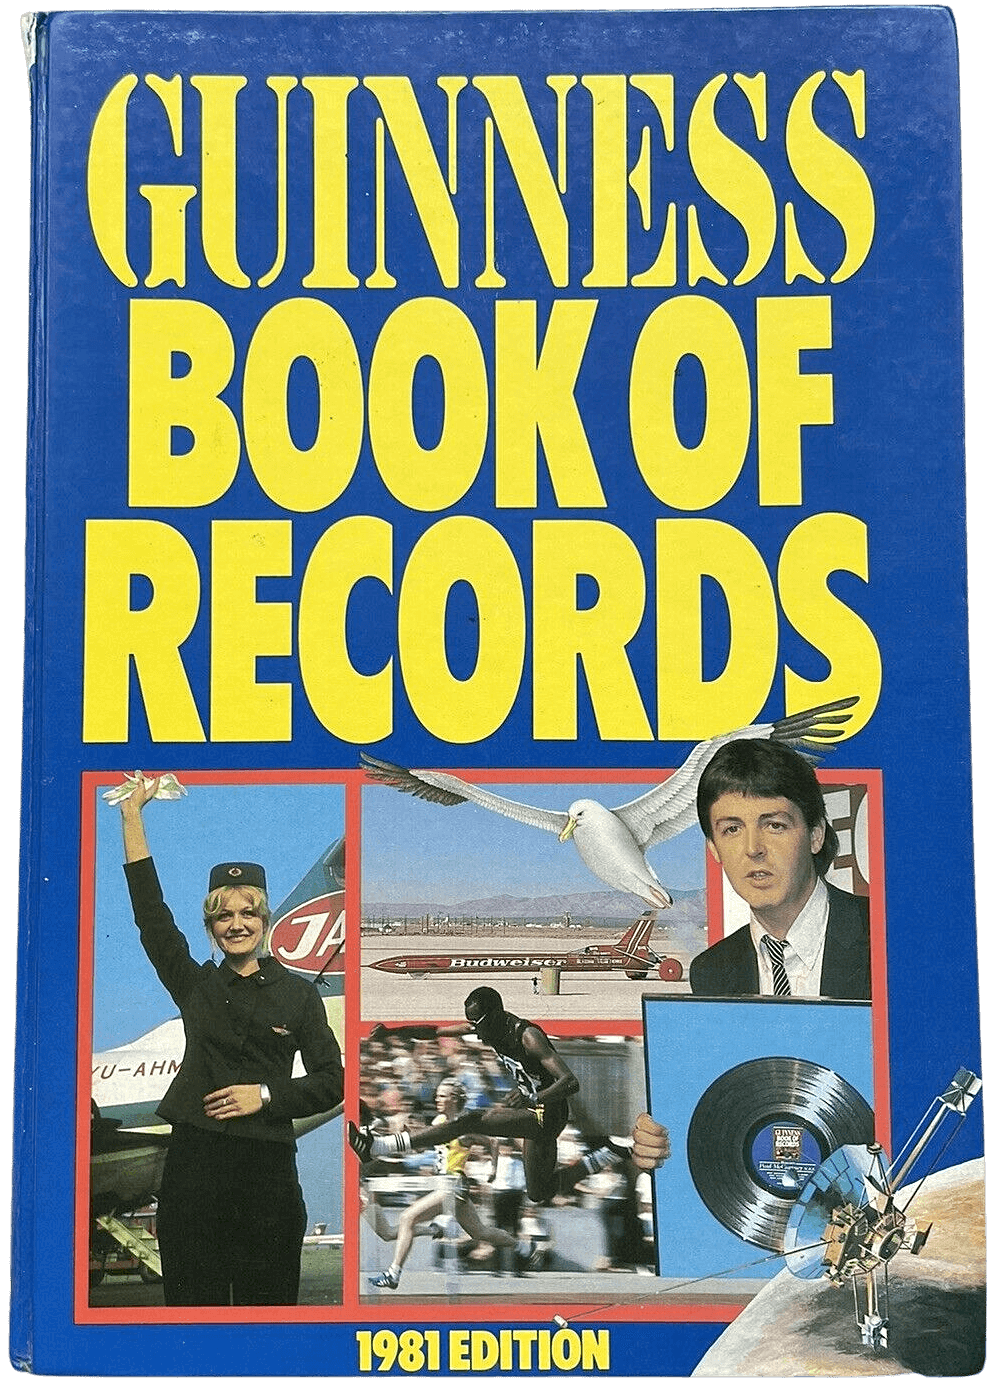 <p>Guinness Book Of Records (1981 Edition) - remember this one?</p>